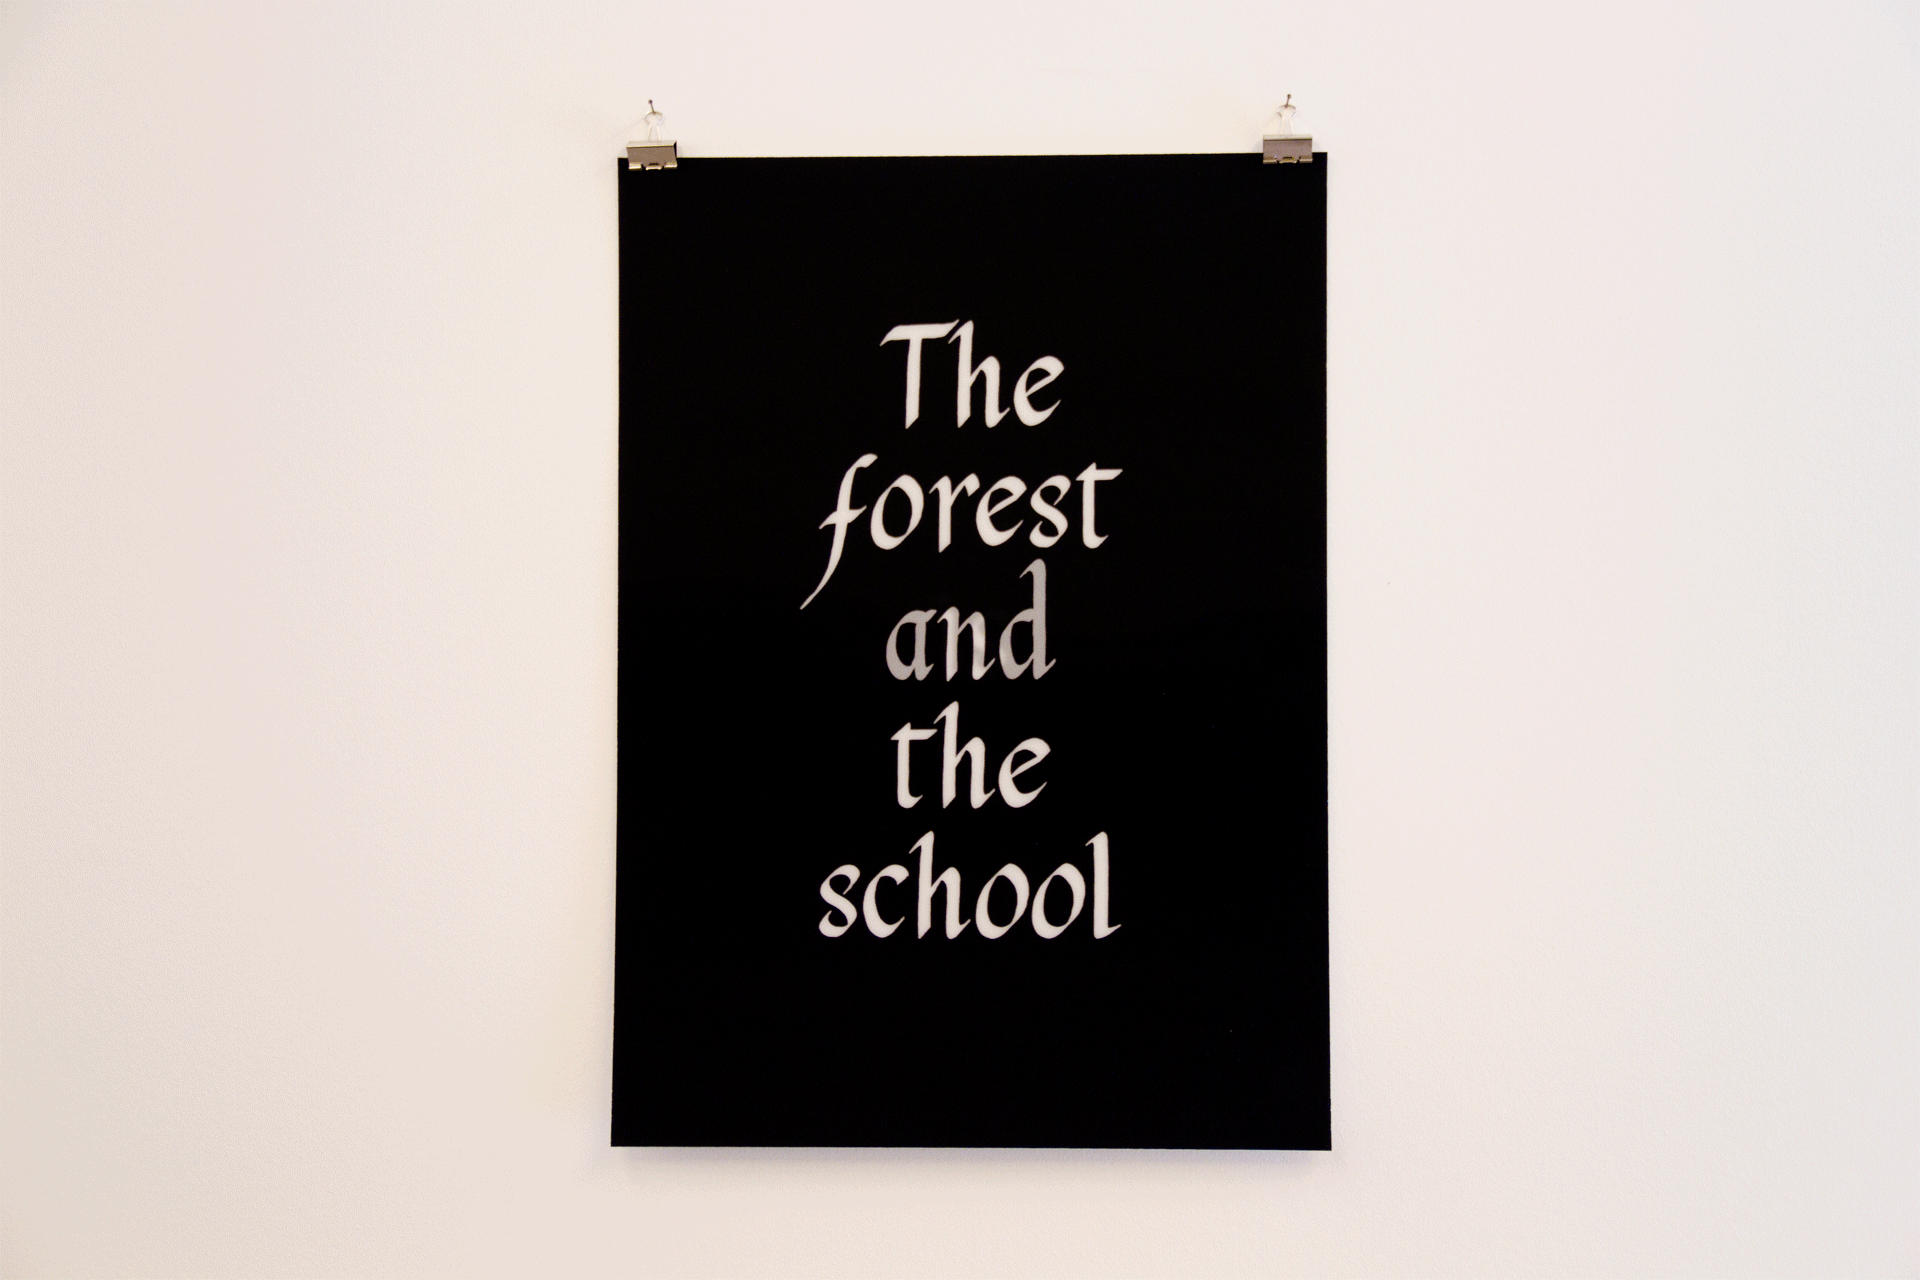 Nuno da Luz, The forest is the school (for Pedro Neves Marques), 2017. Lenticular print, 84,1 x 59,4 cm
